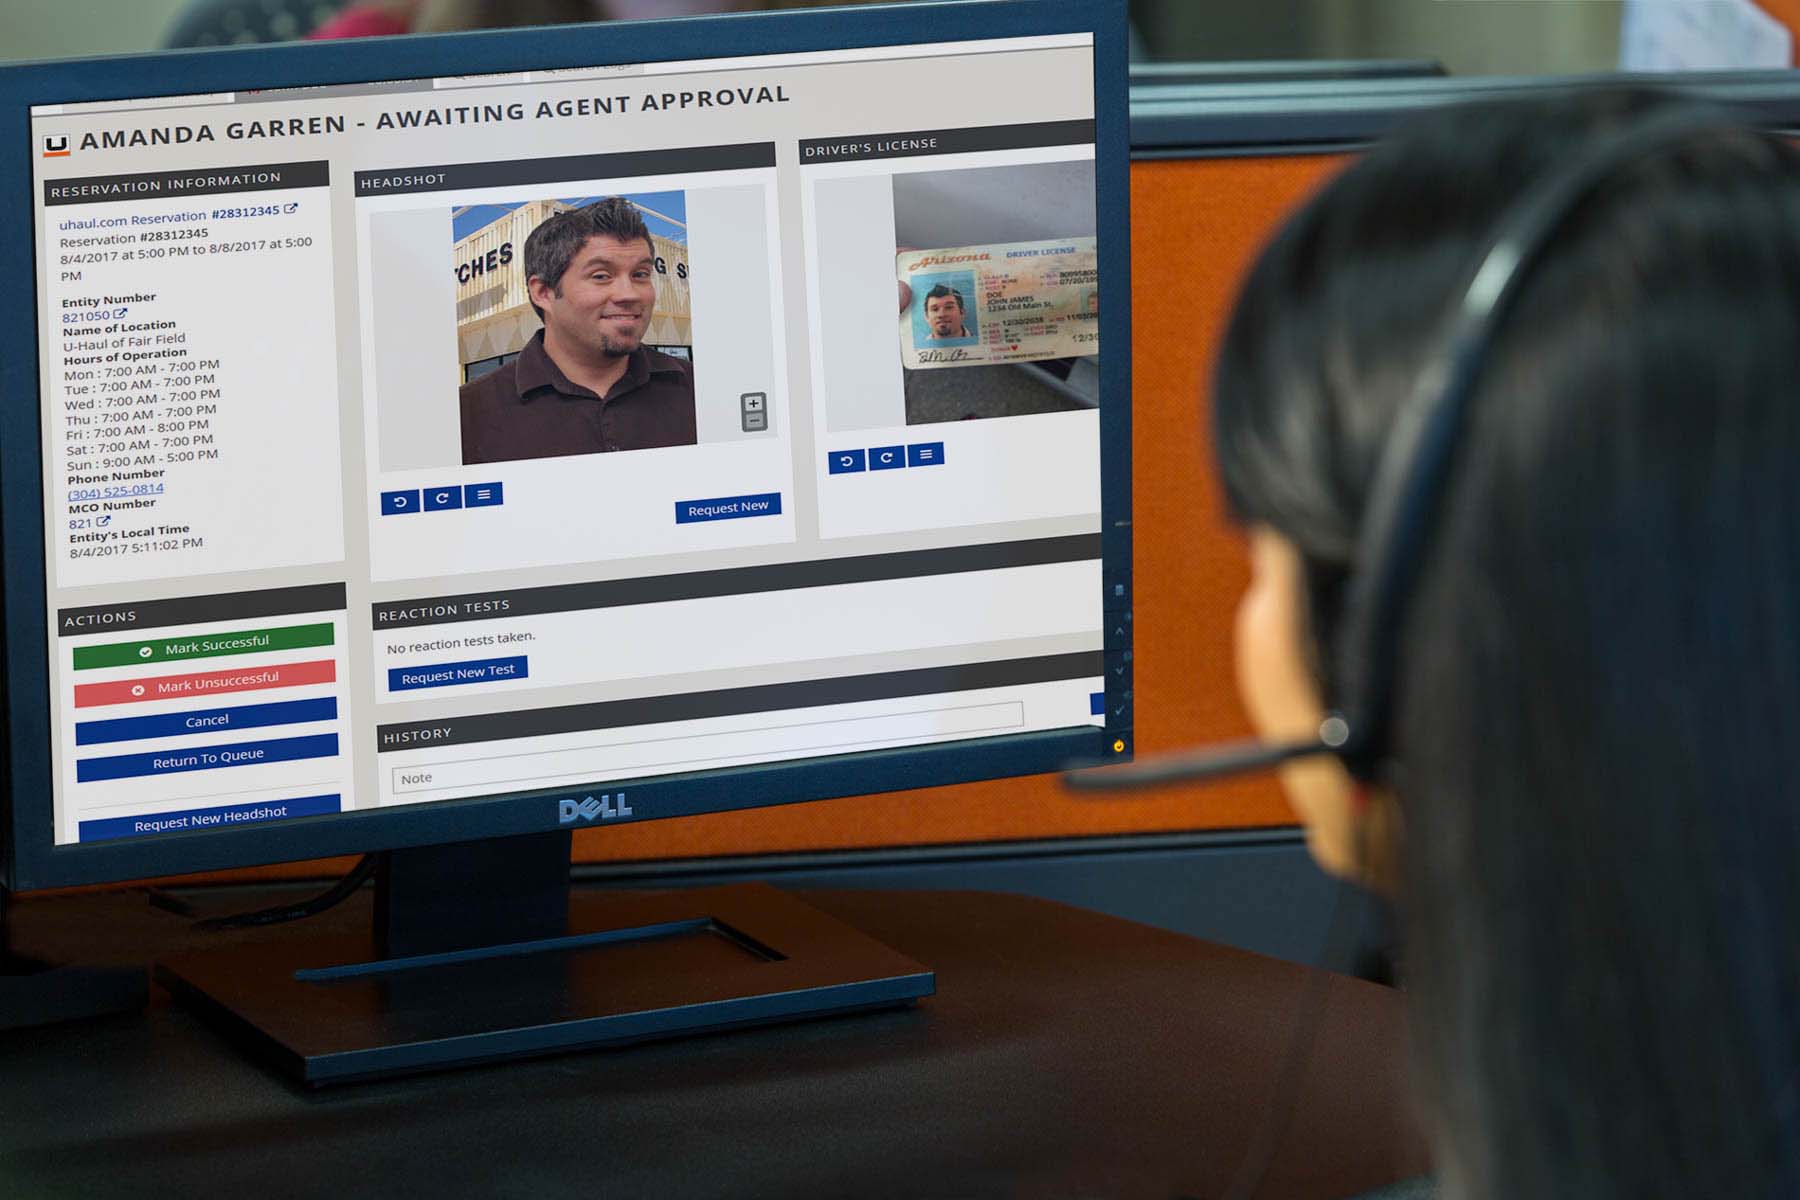 Our certified live verify specialists are trained to analyze facial features when comparing photos and quickly assess submitted information. They work swiftly while putting safety and security first.